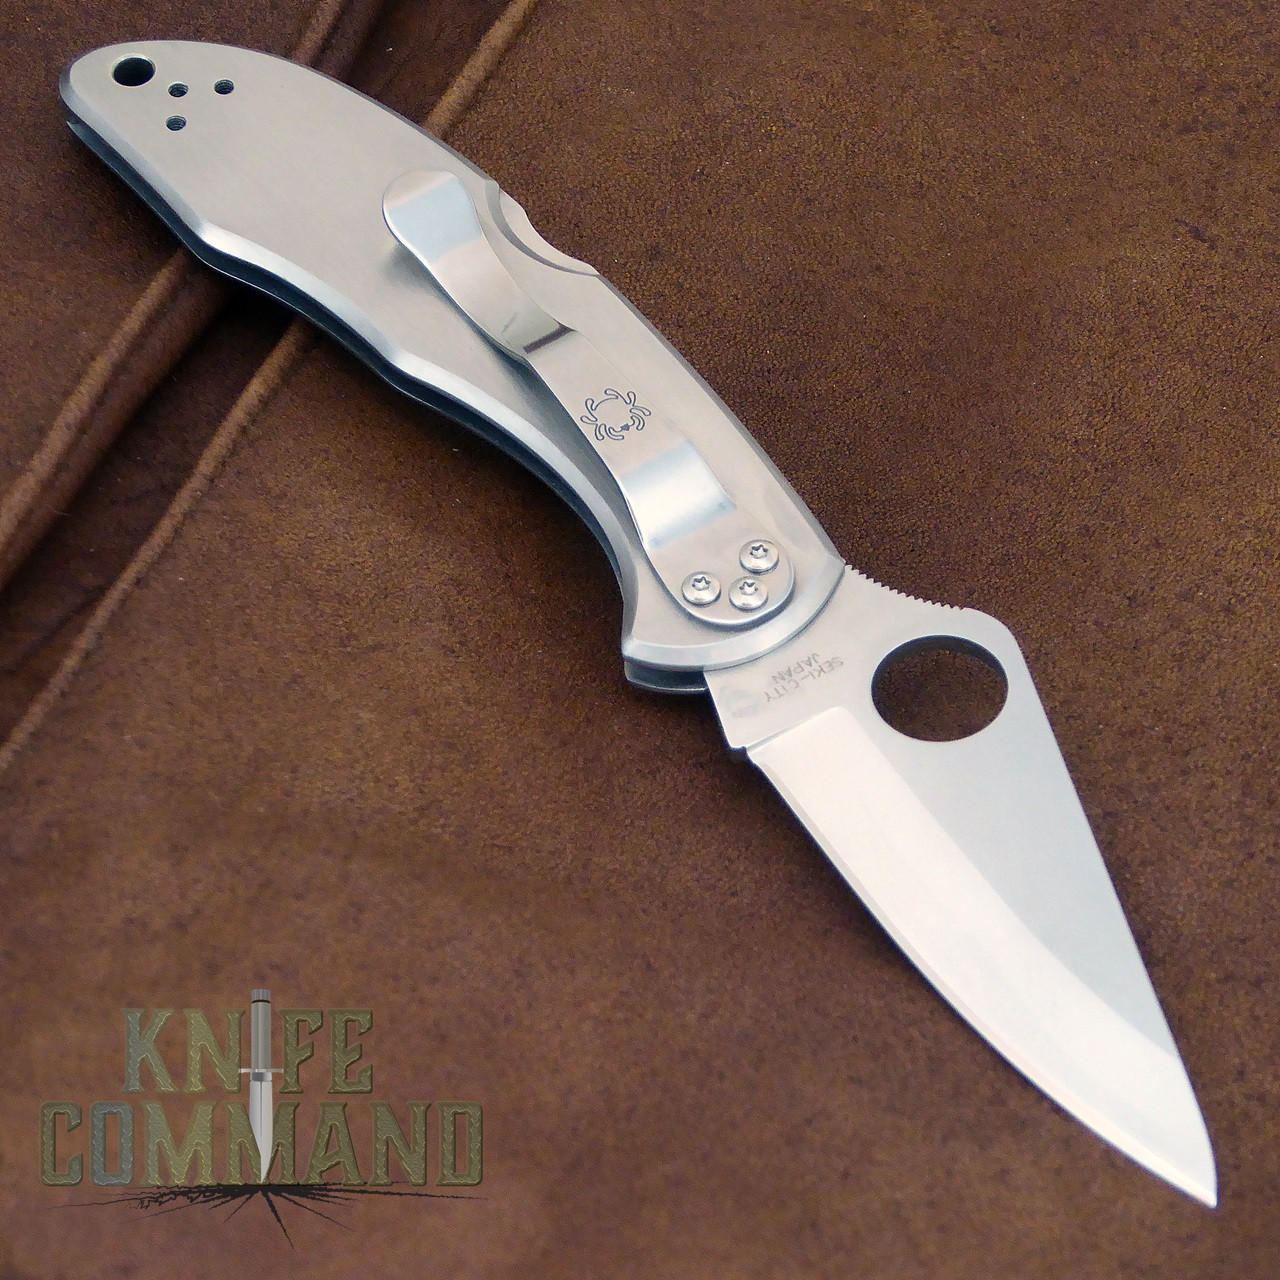 Spyderco Delica Santa Fe Stoneworks Blue Line Special Knife.  Stainless steel knife with pocket clip.